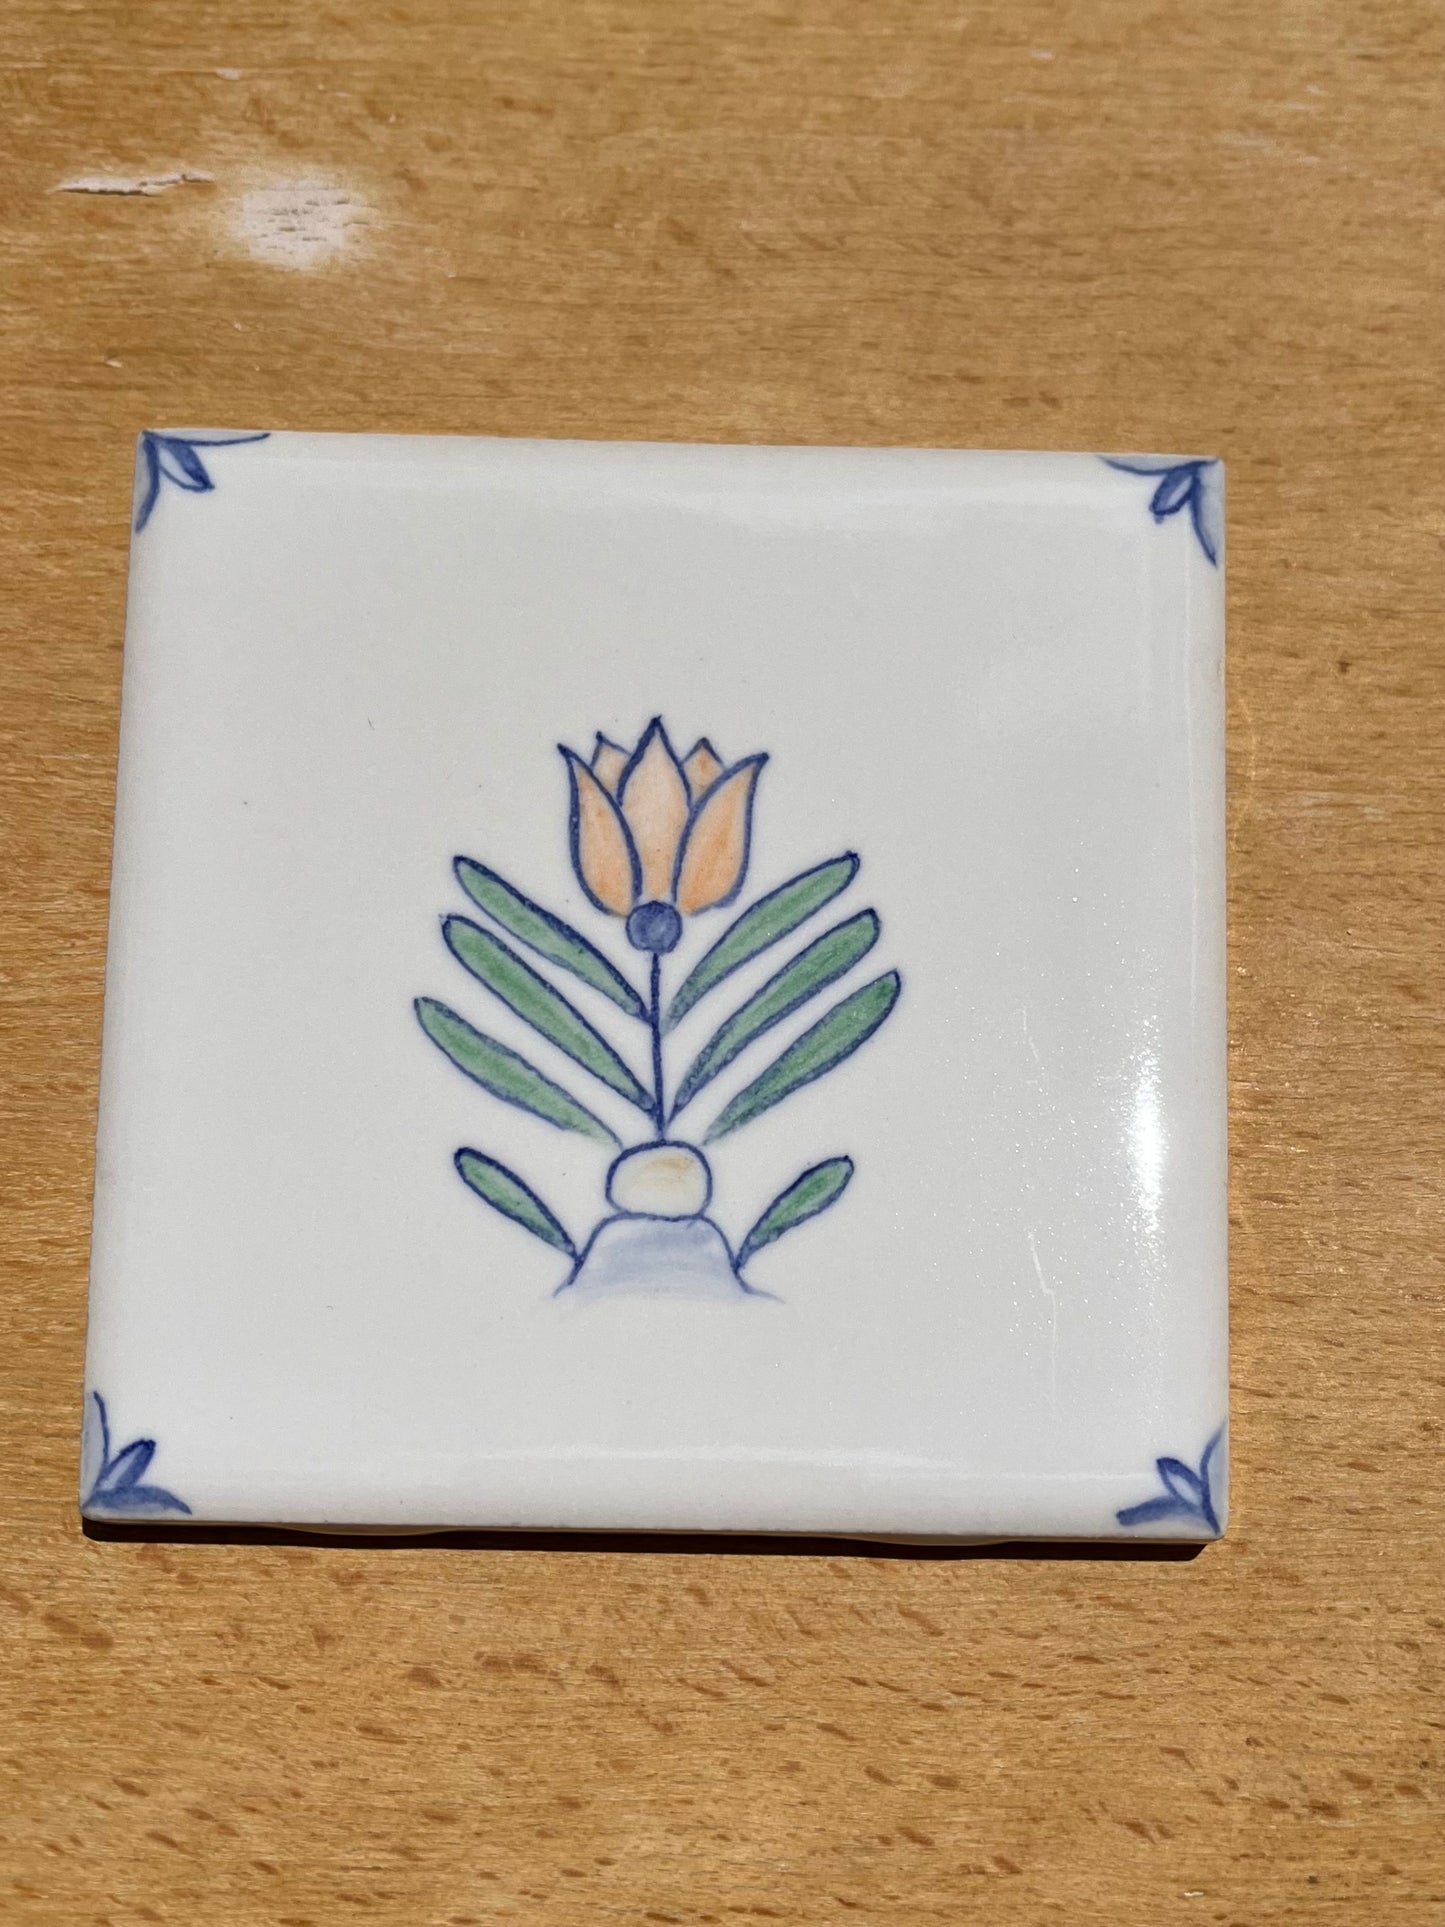 Nine hand painted 4.25" tiles, polychromatic Delft style